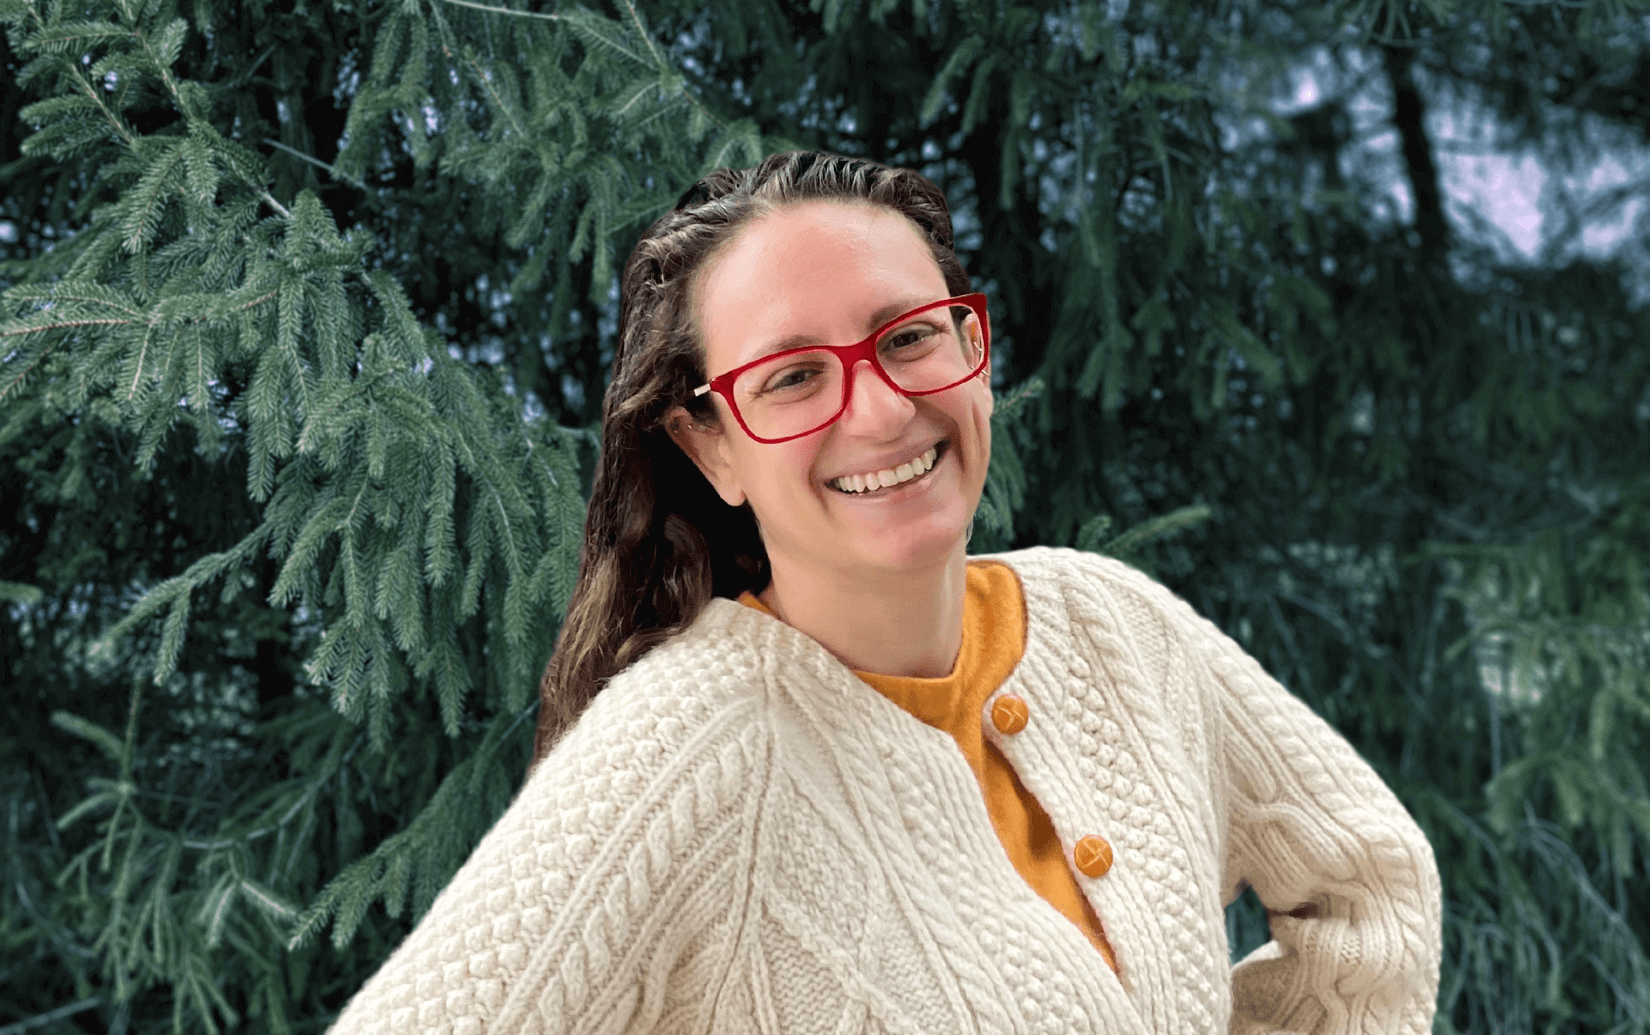 A smiling woman in red glasses and a cream cable-knit sweater stands in front of green pine trees.